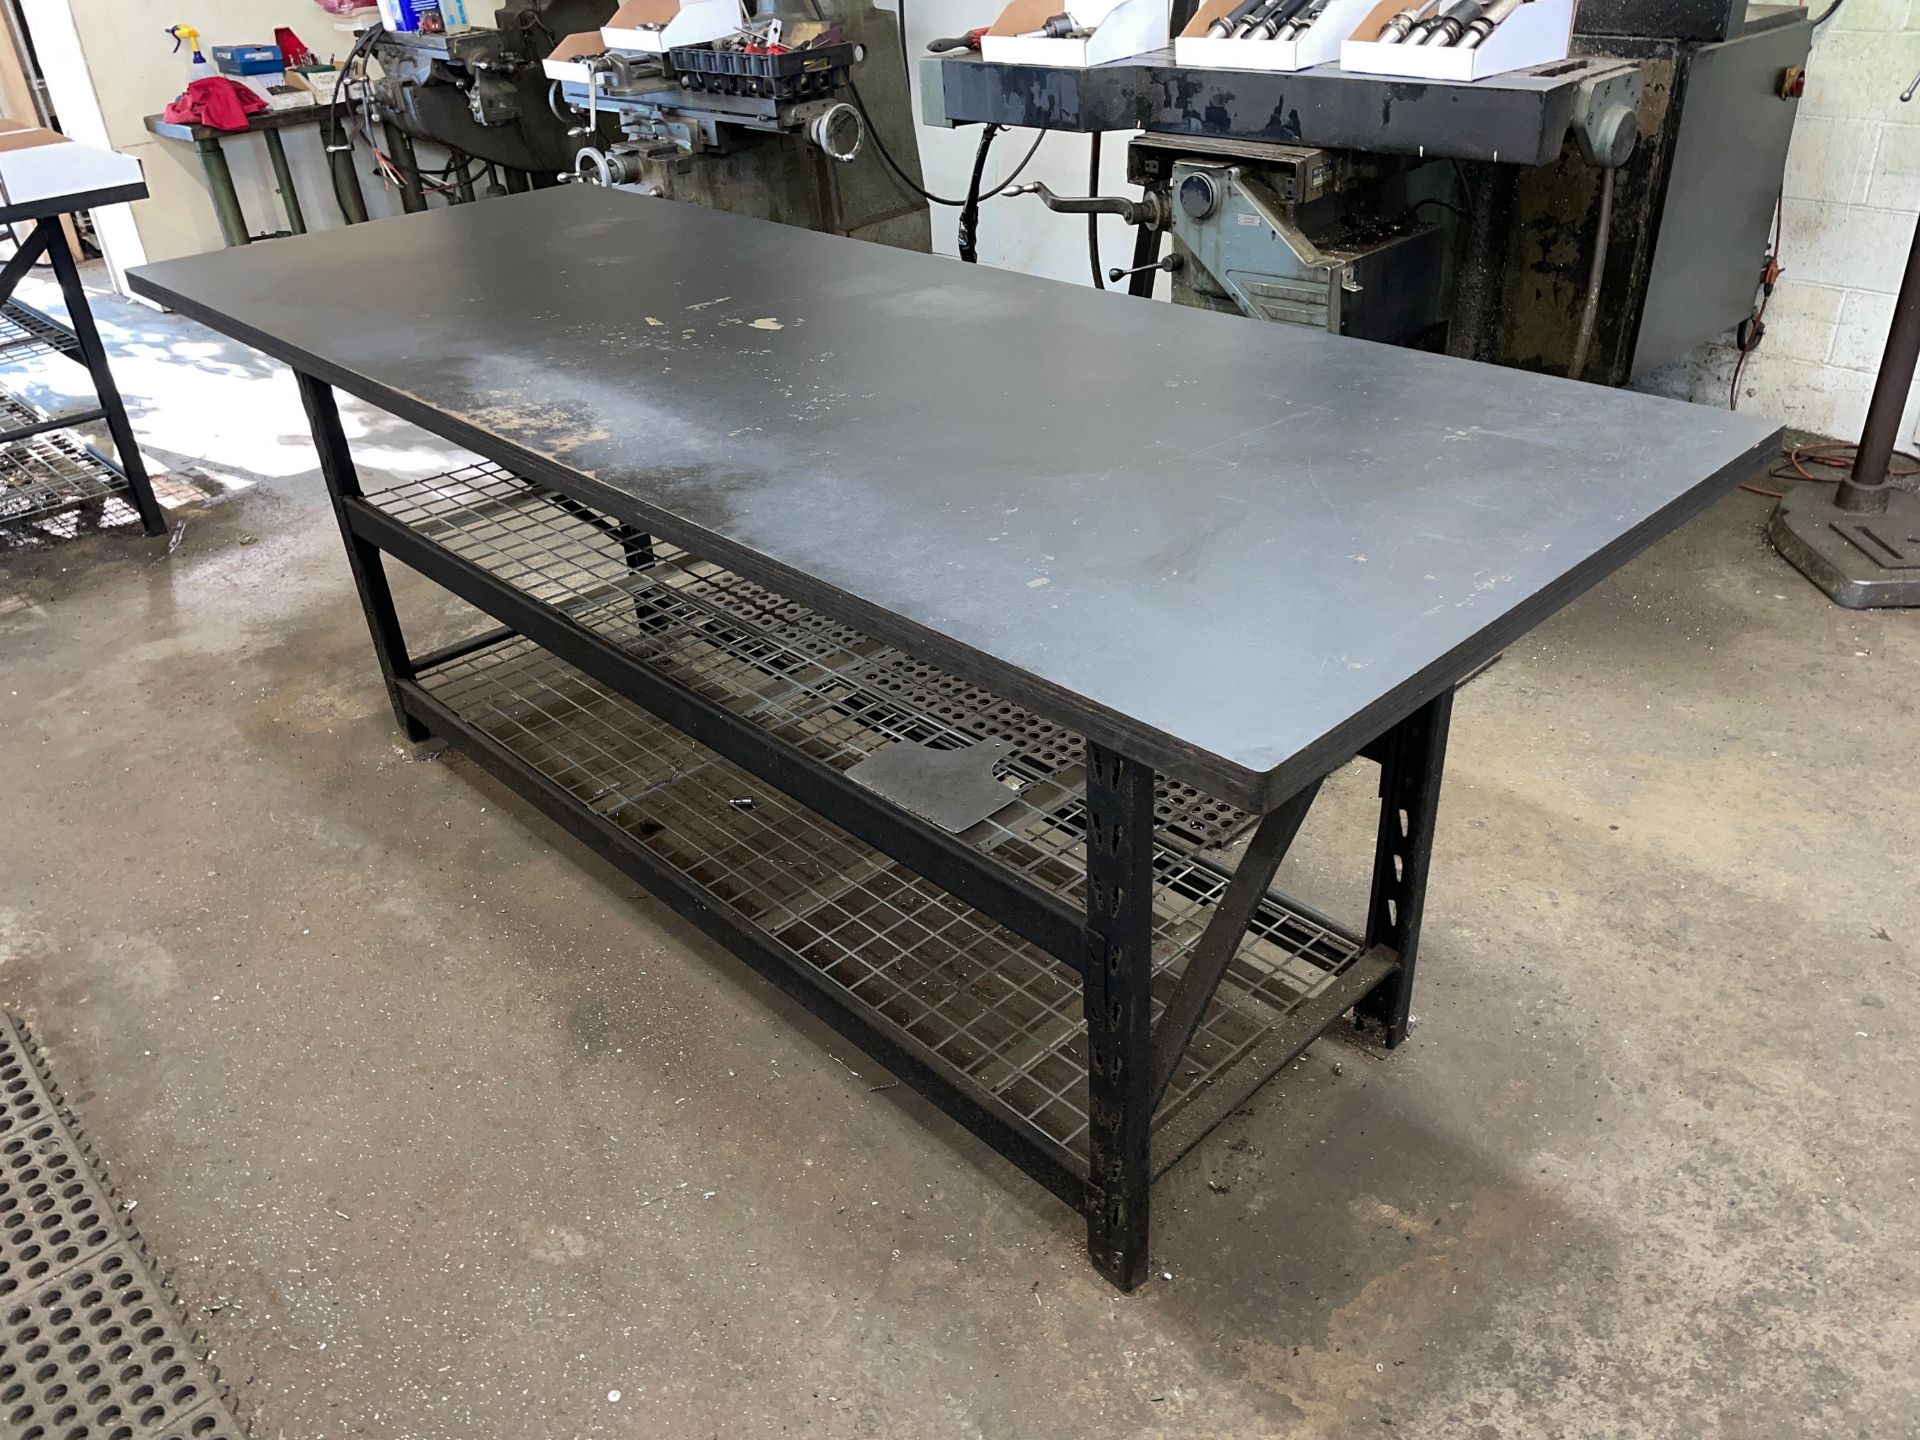 Steel Frame Table 96"L x 36"W with Shelves - Image 3 of 4